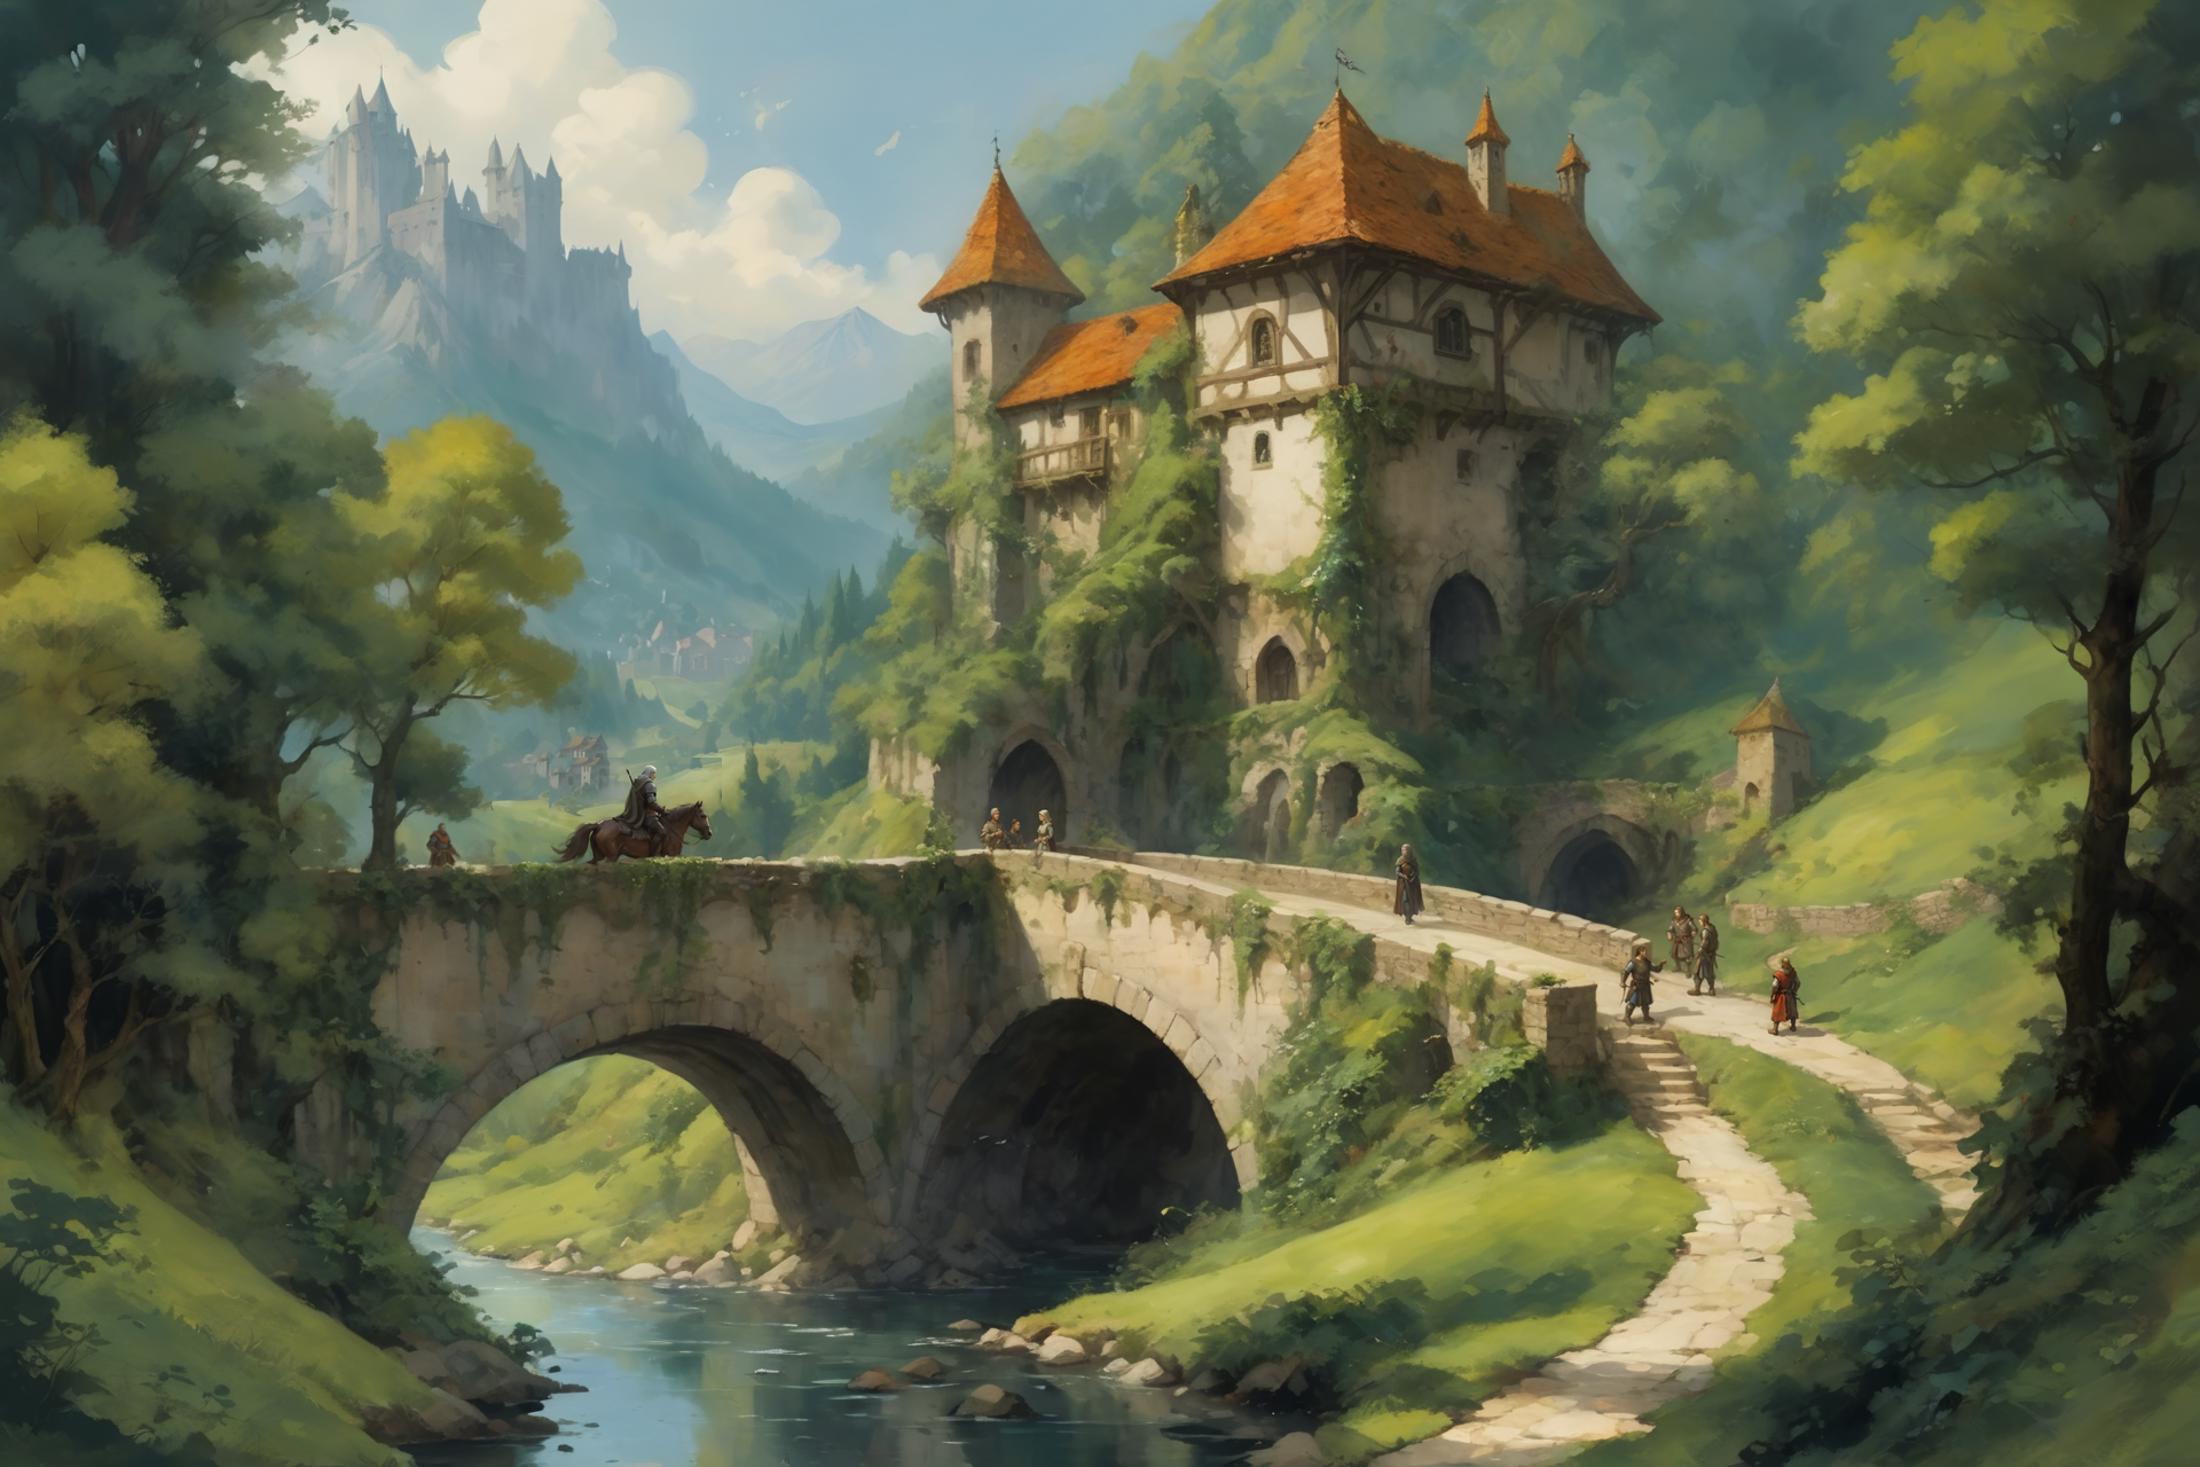 A painting of a medieval castle with a bridge and people walking